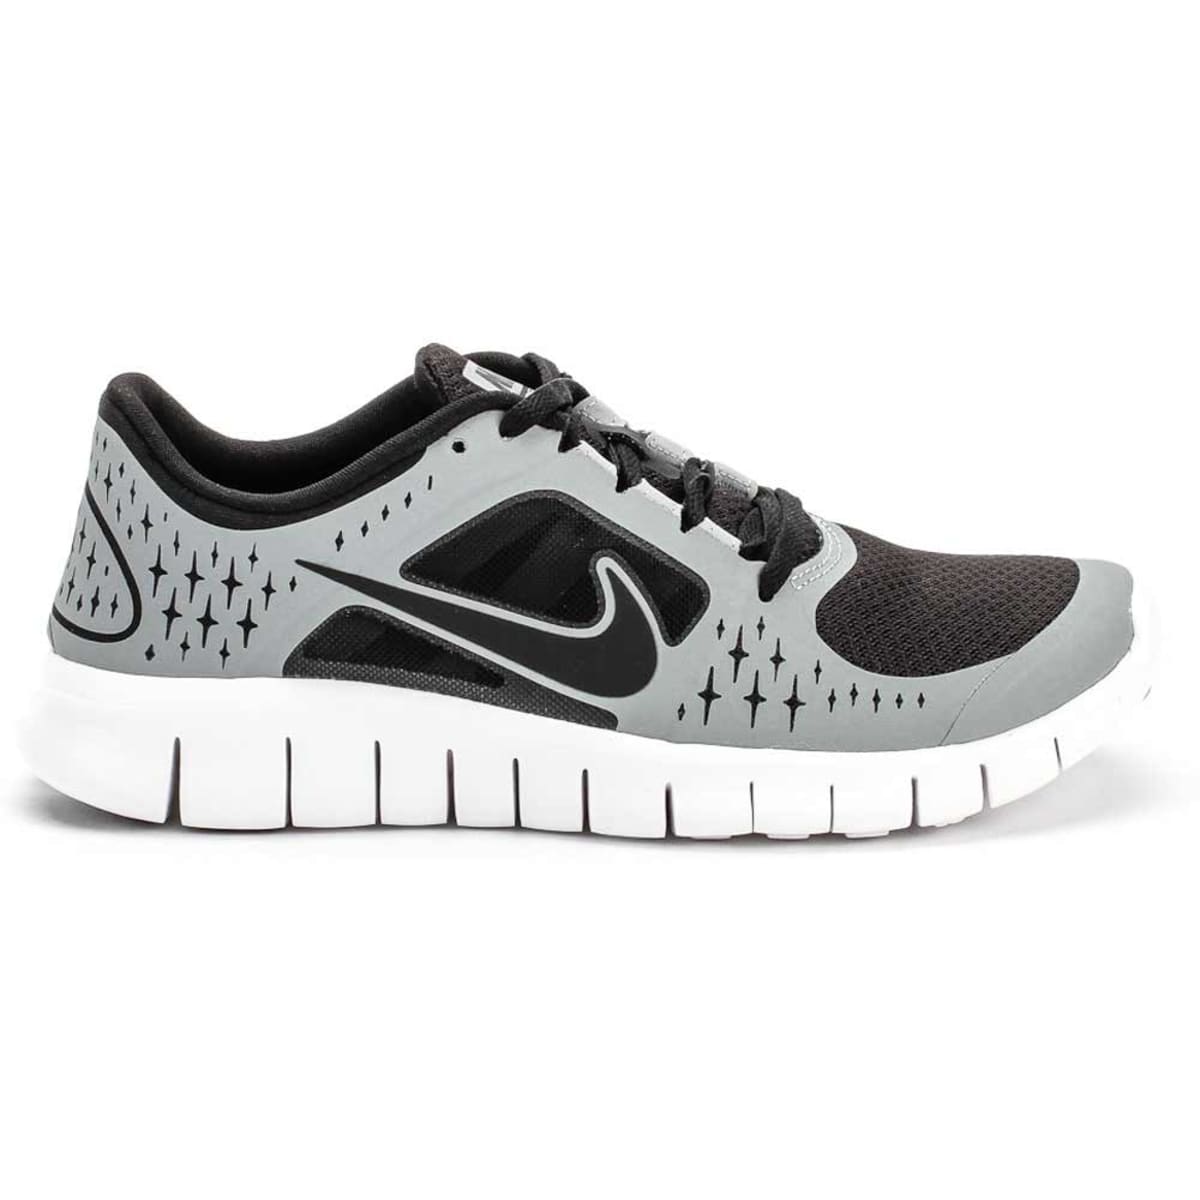 Sneaker News, Collabs Info | Nike Free Run+ 3, Release Dates, navy blue nike uptowns shoes | | Nike